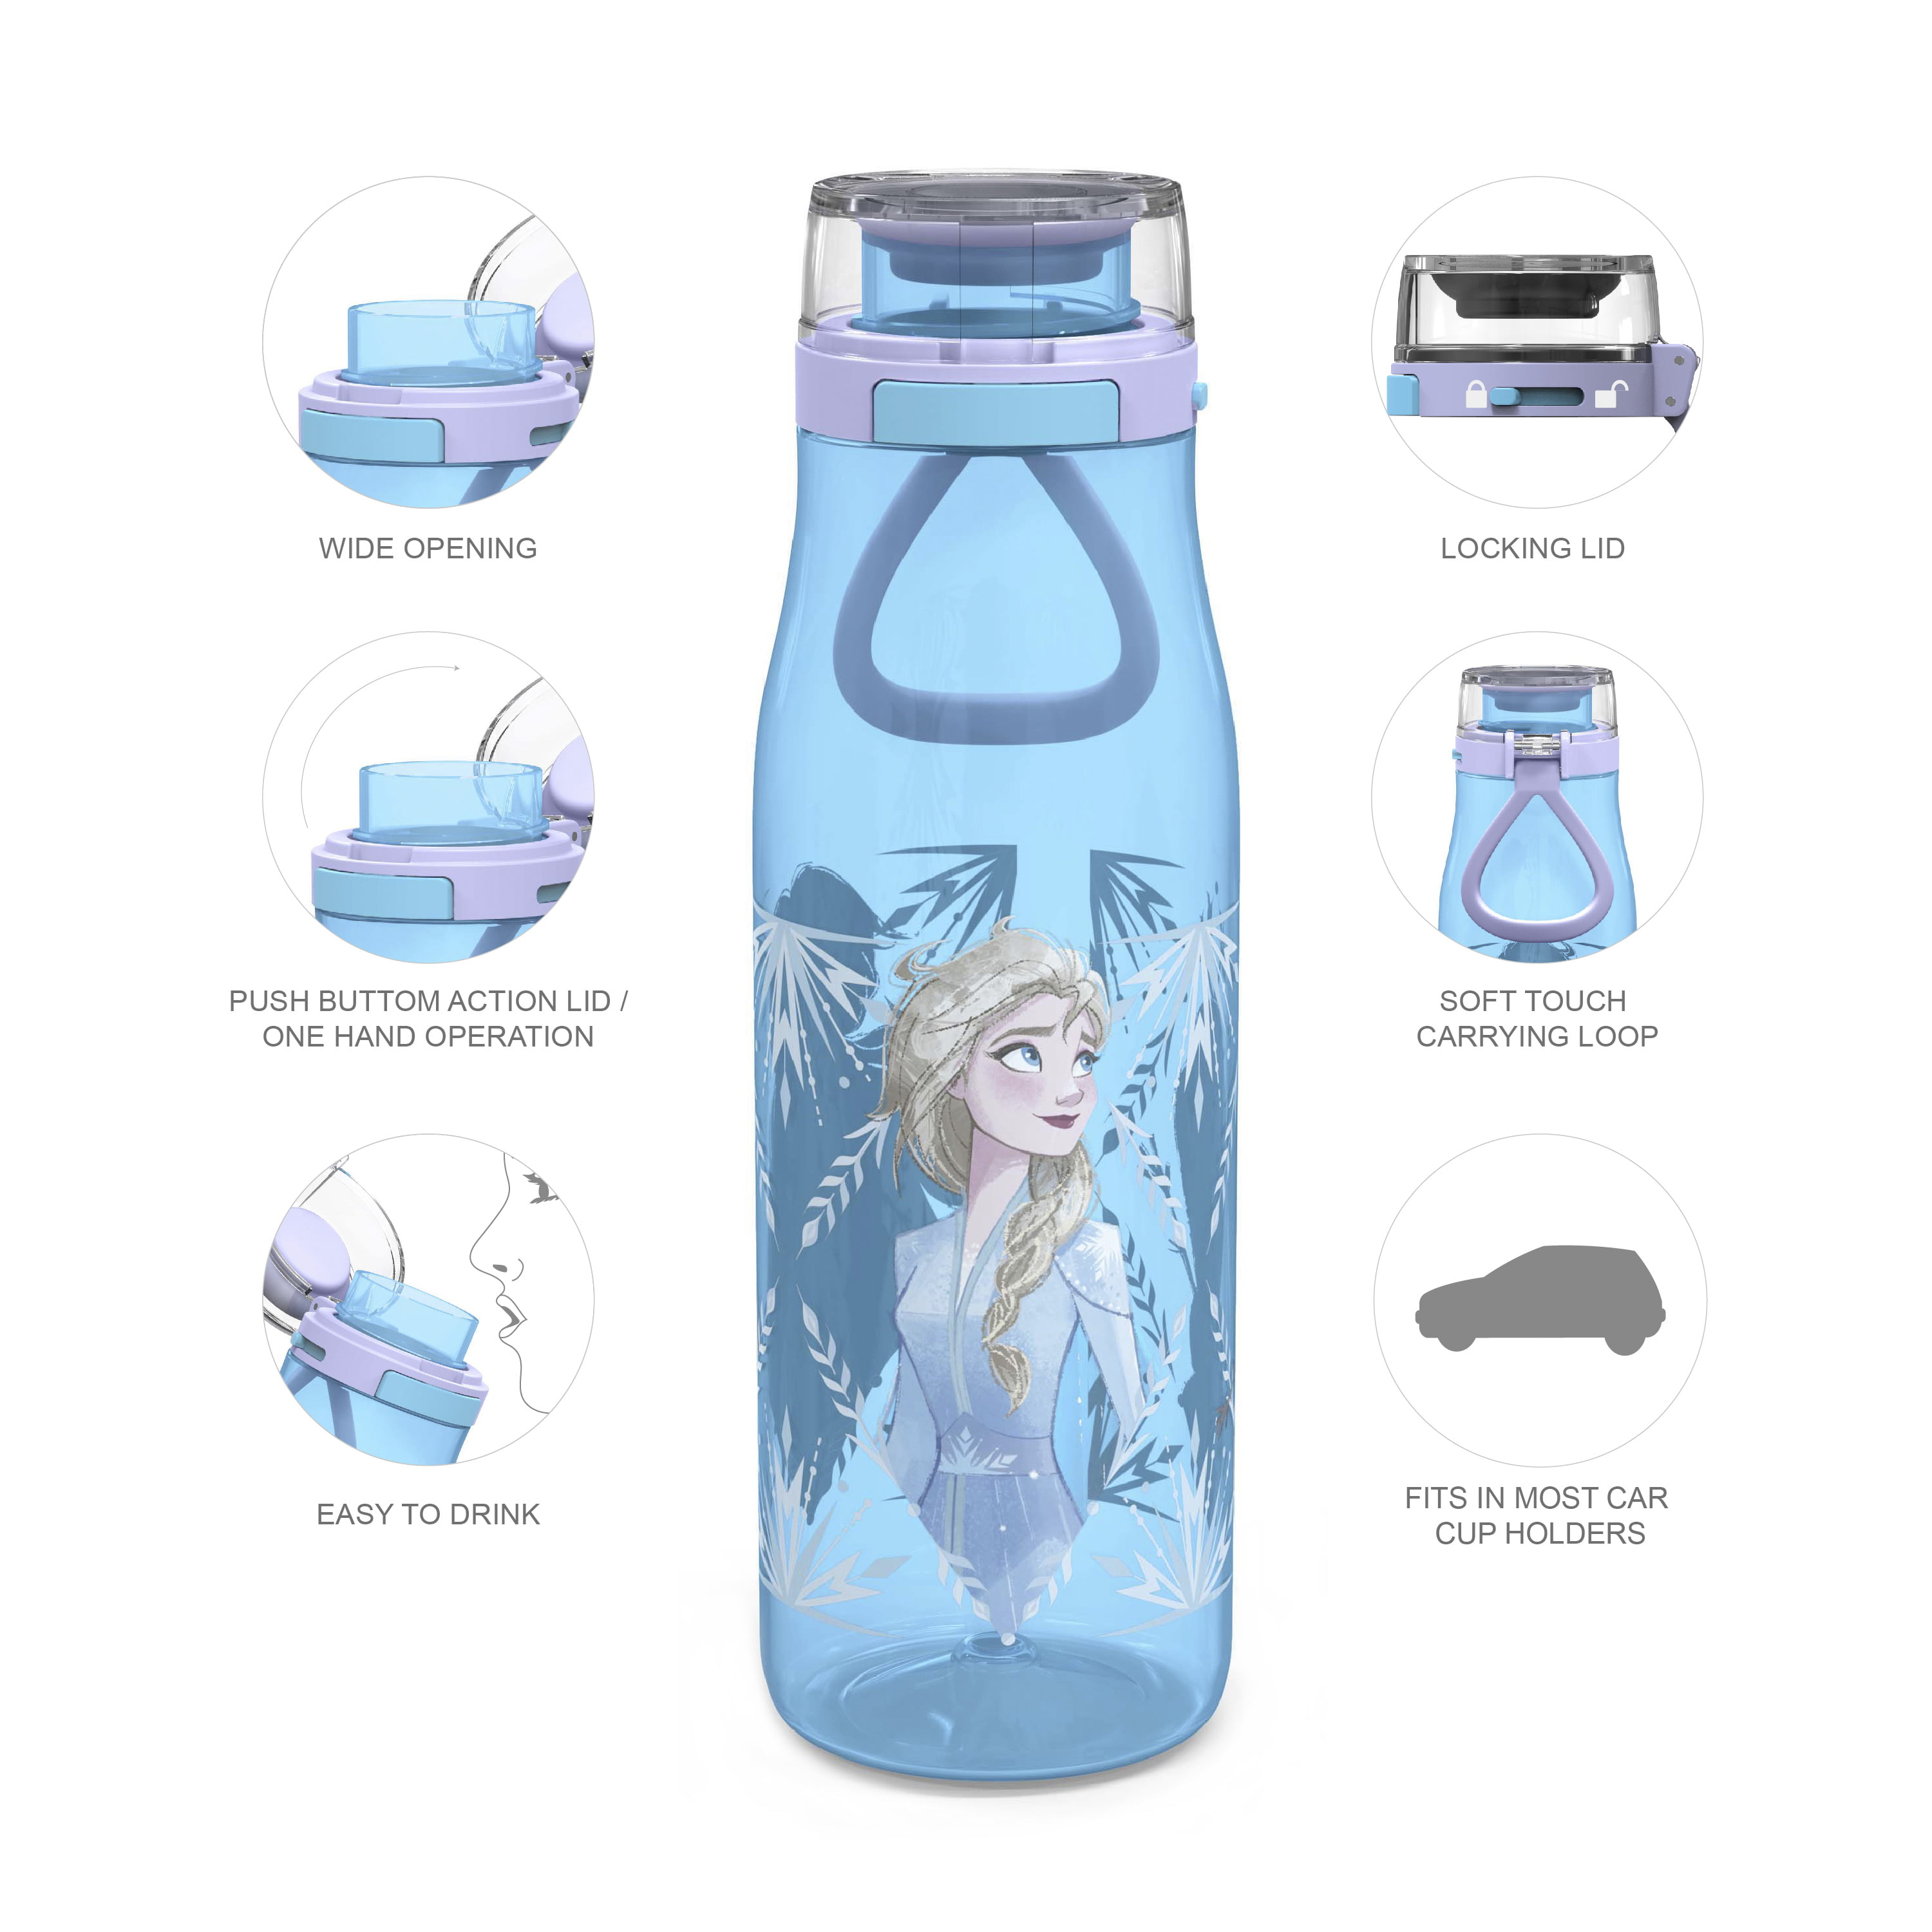 Save on Zak! Insulated Bottle Kionoa 20 oz Order Online Delivery